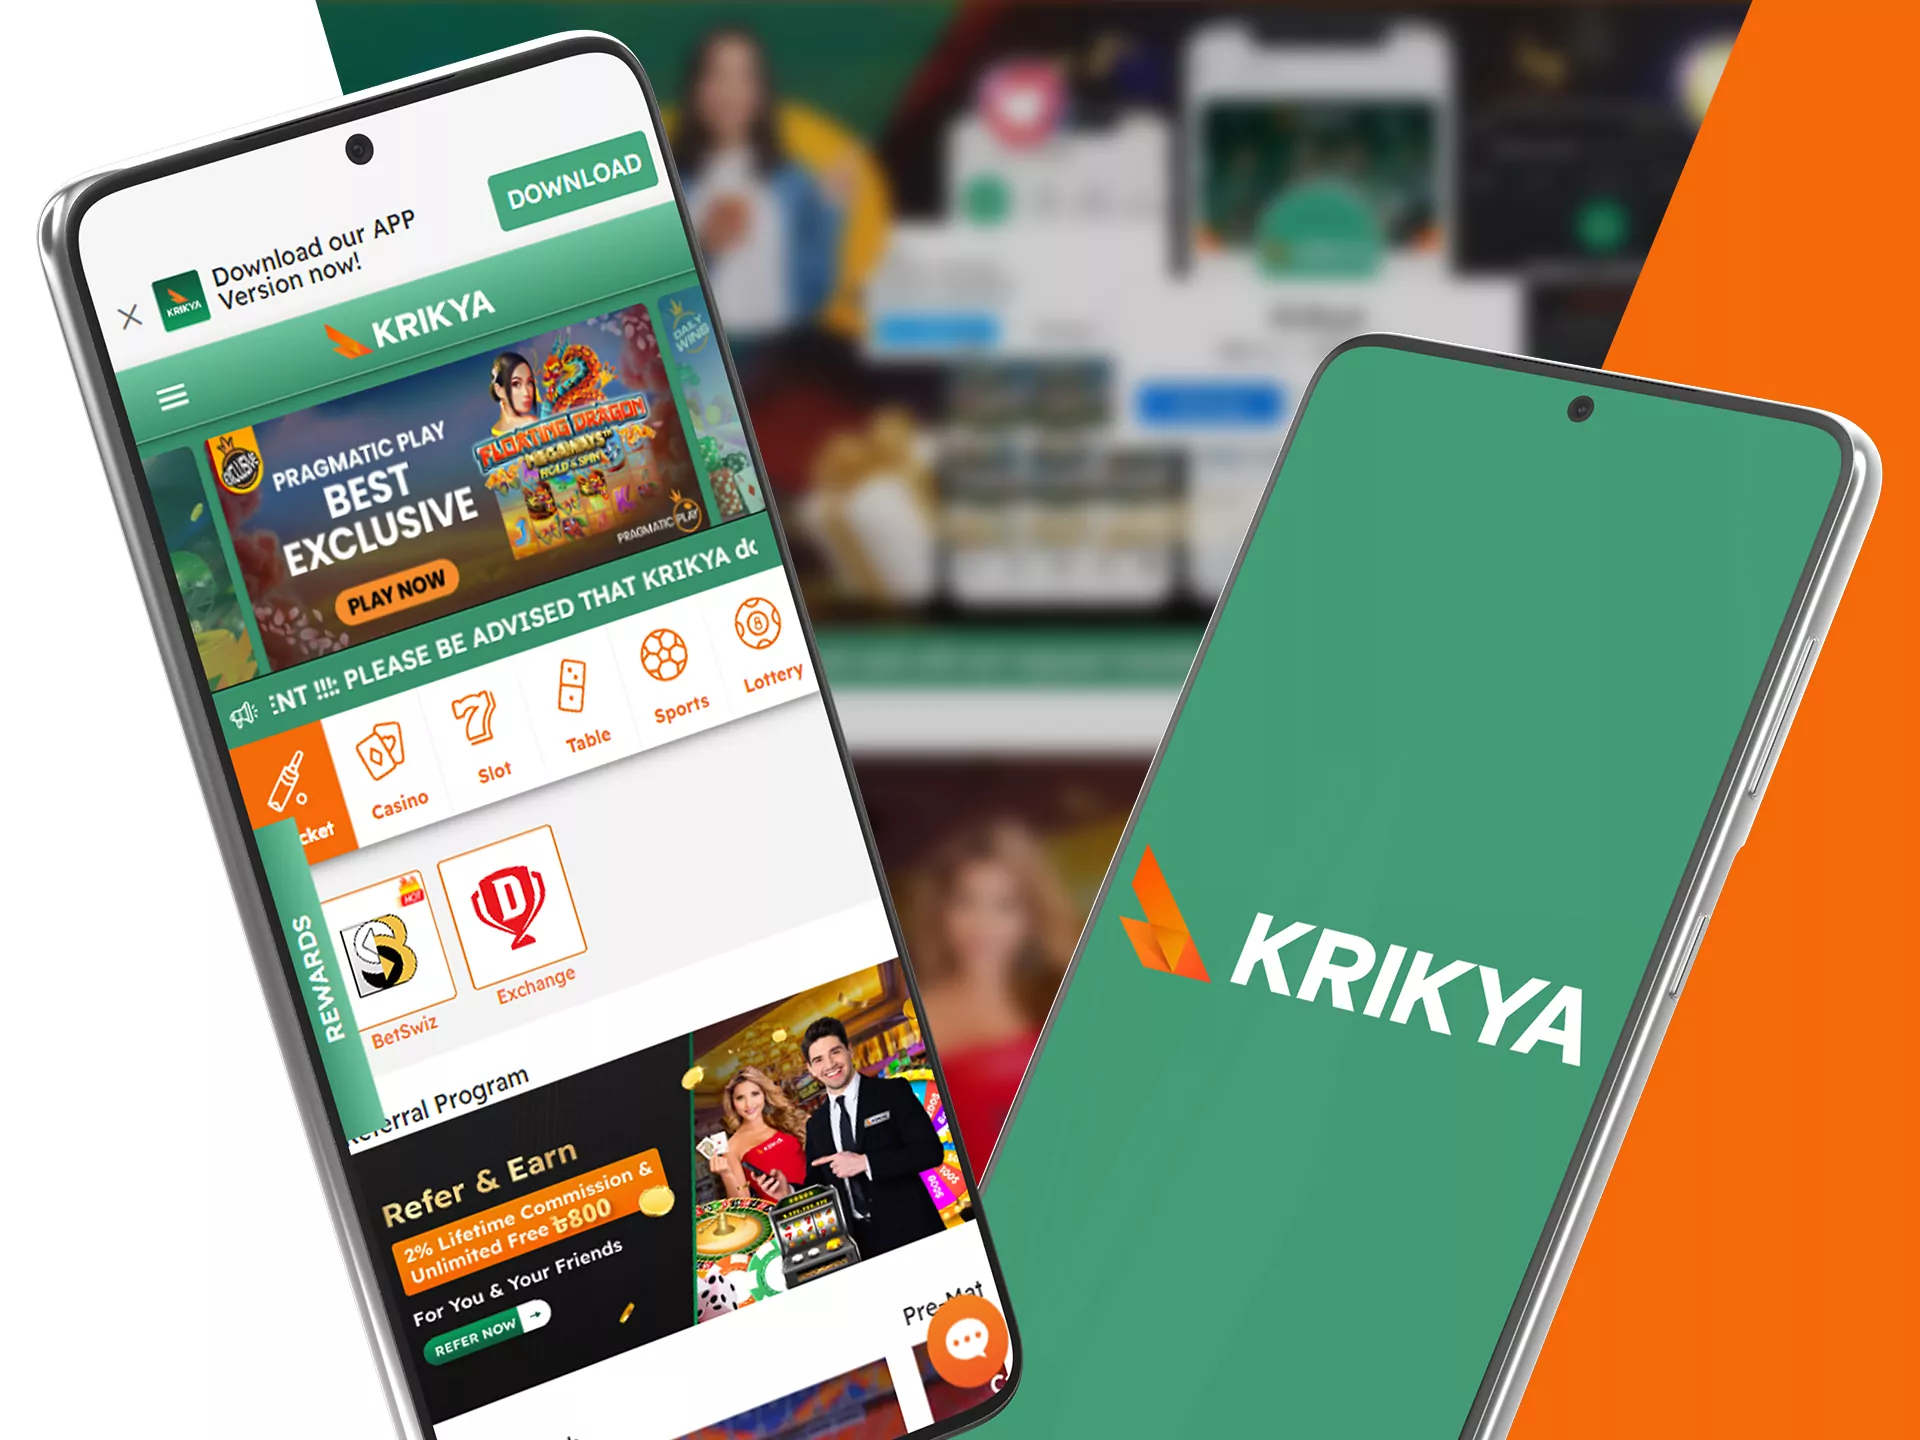 You can use all of the Krikya features with your phone.